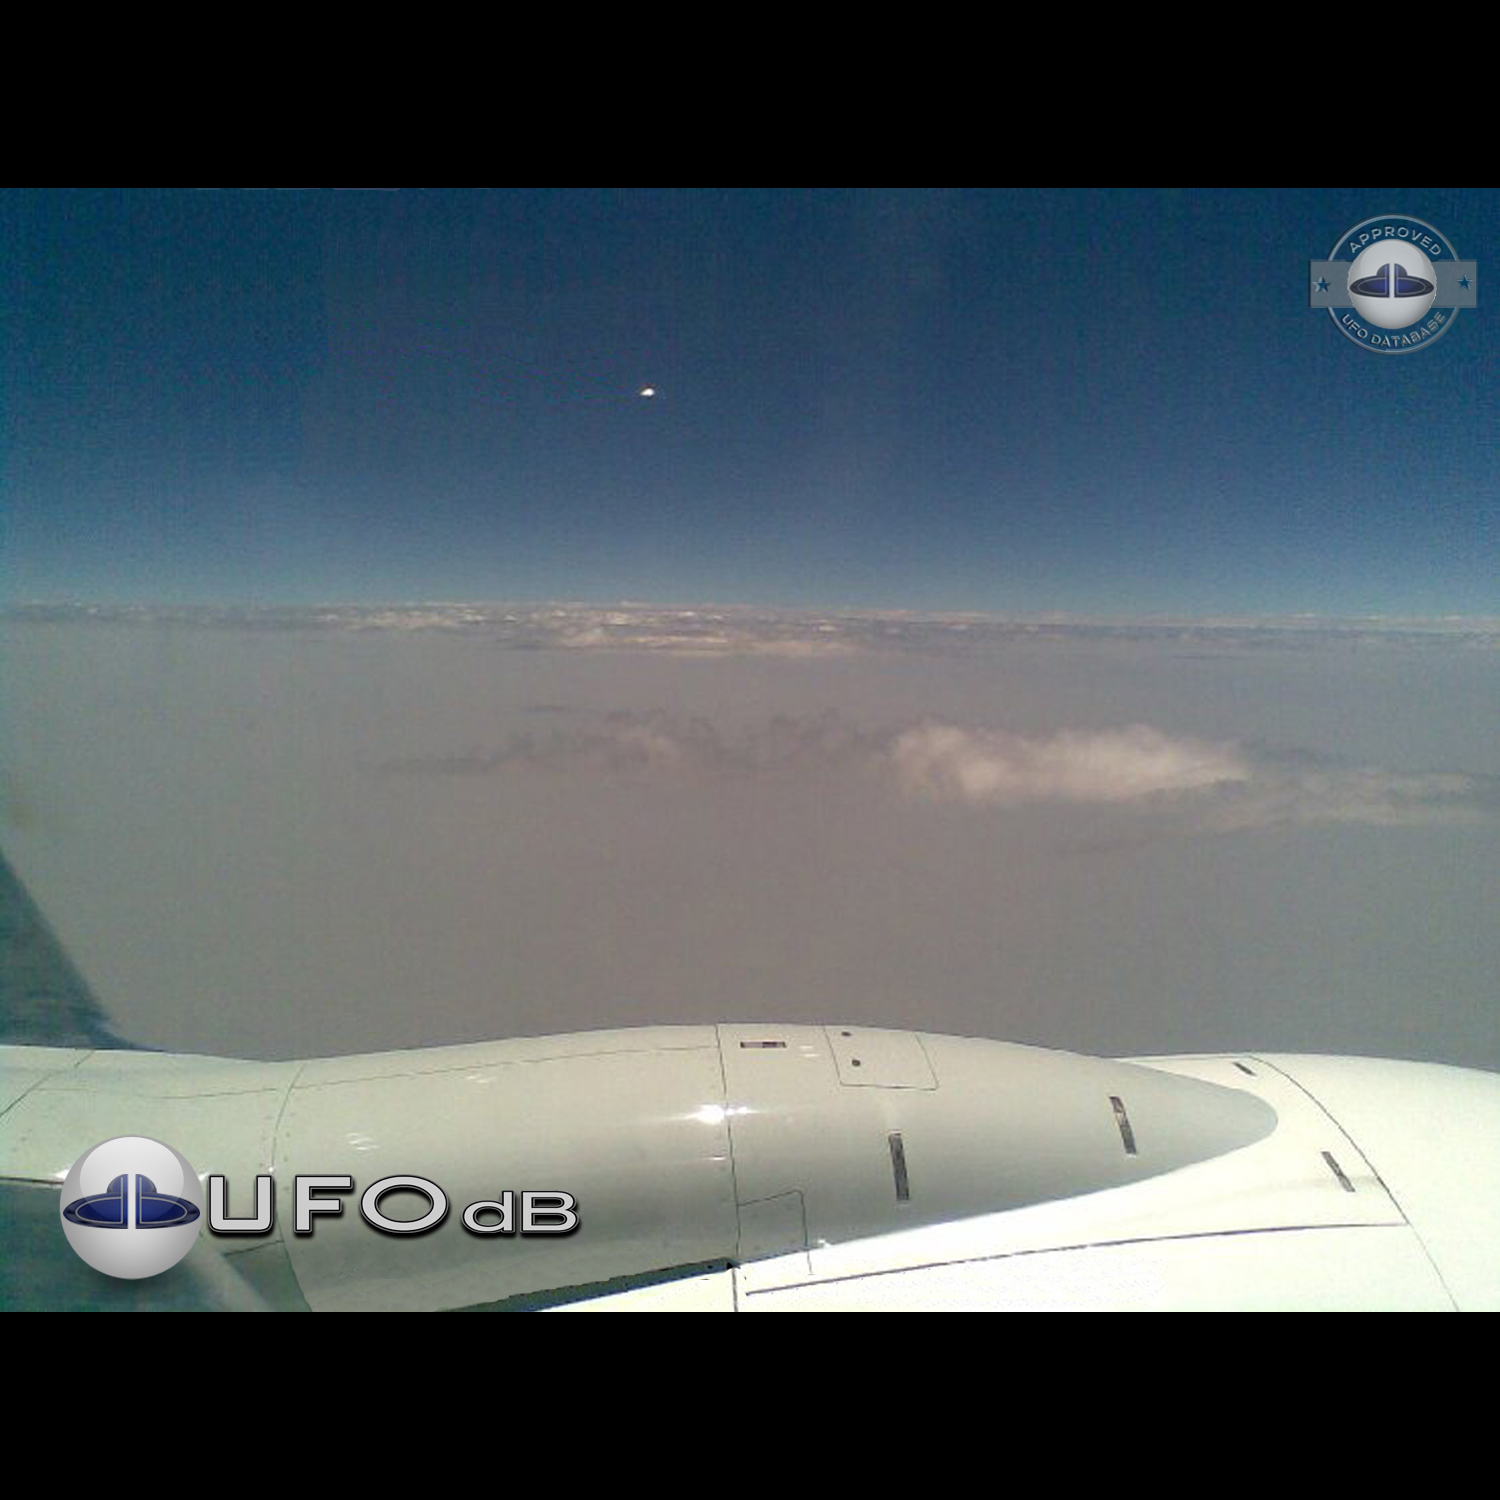 UFO seen over India between New Delhi to Guwahati | UFO picture 2008 UFO Picture #195-1